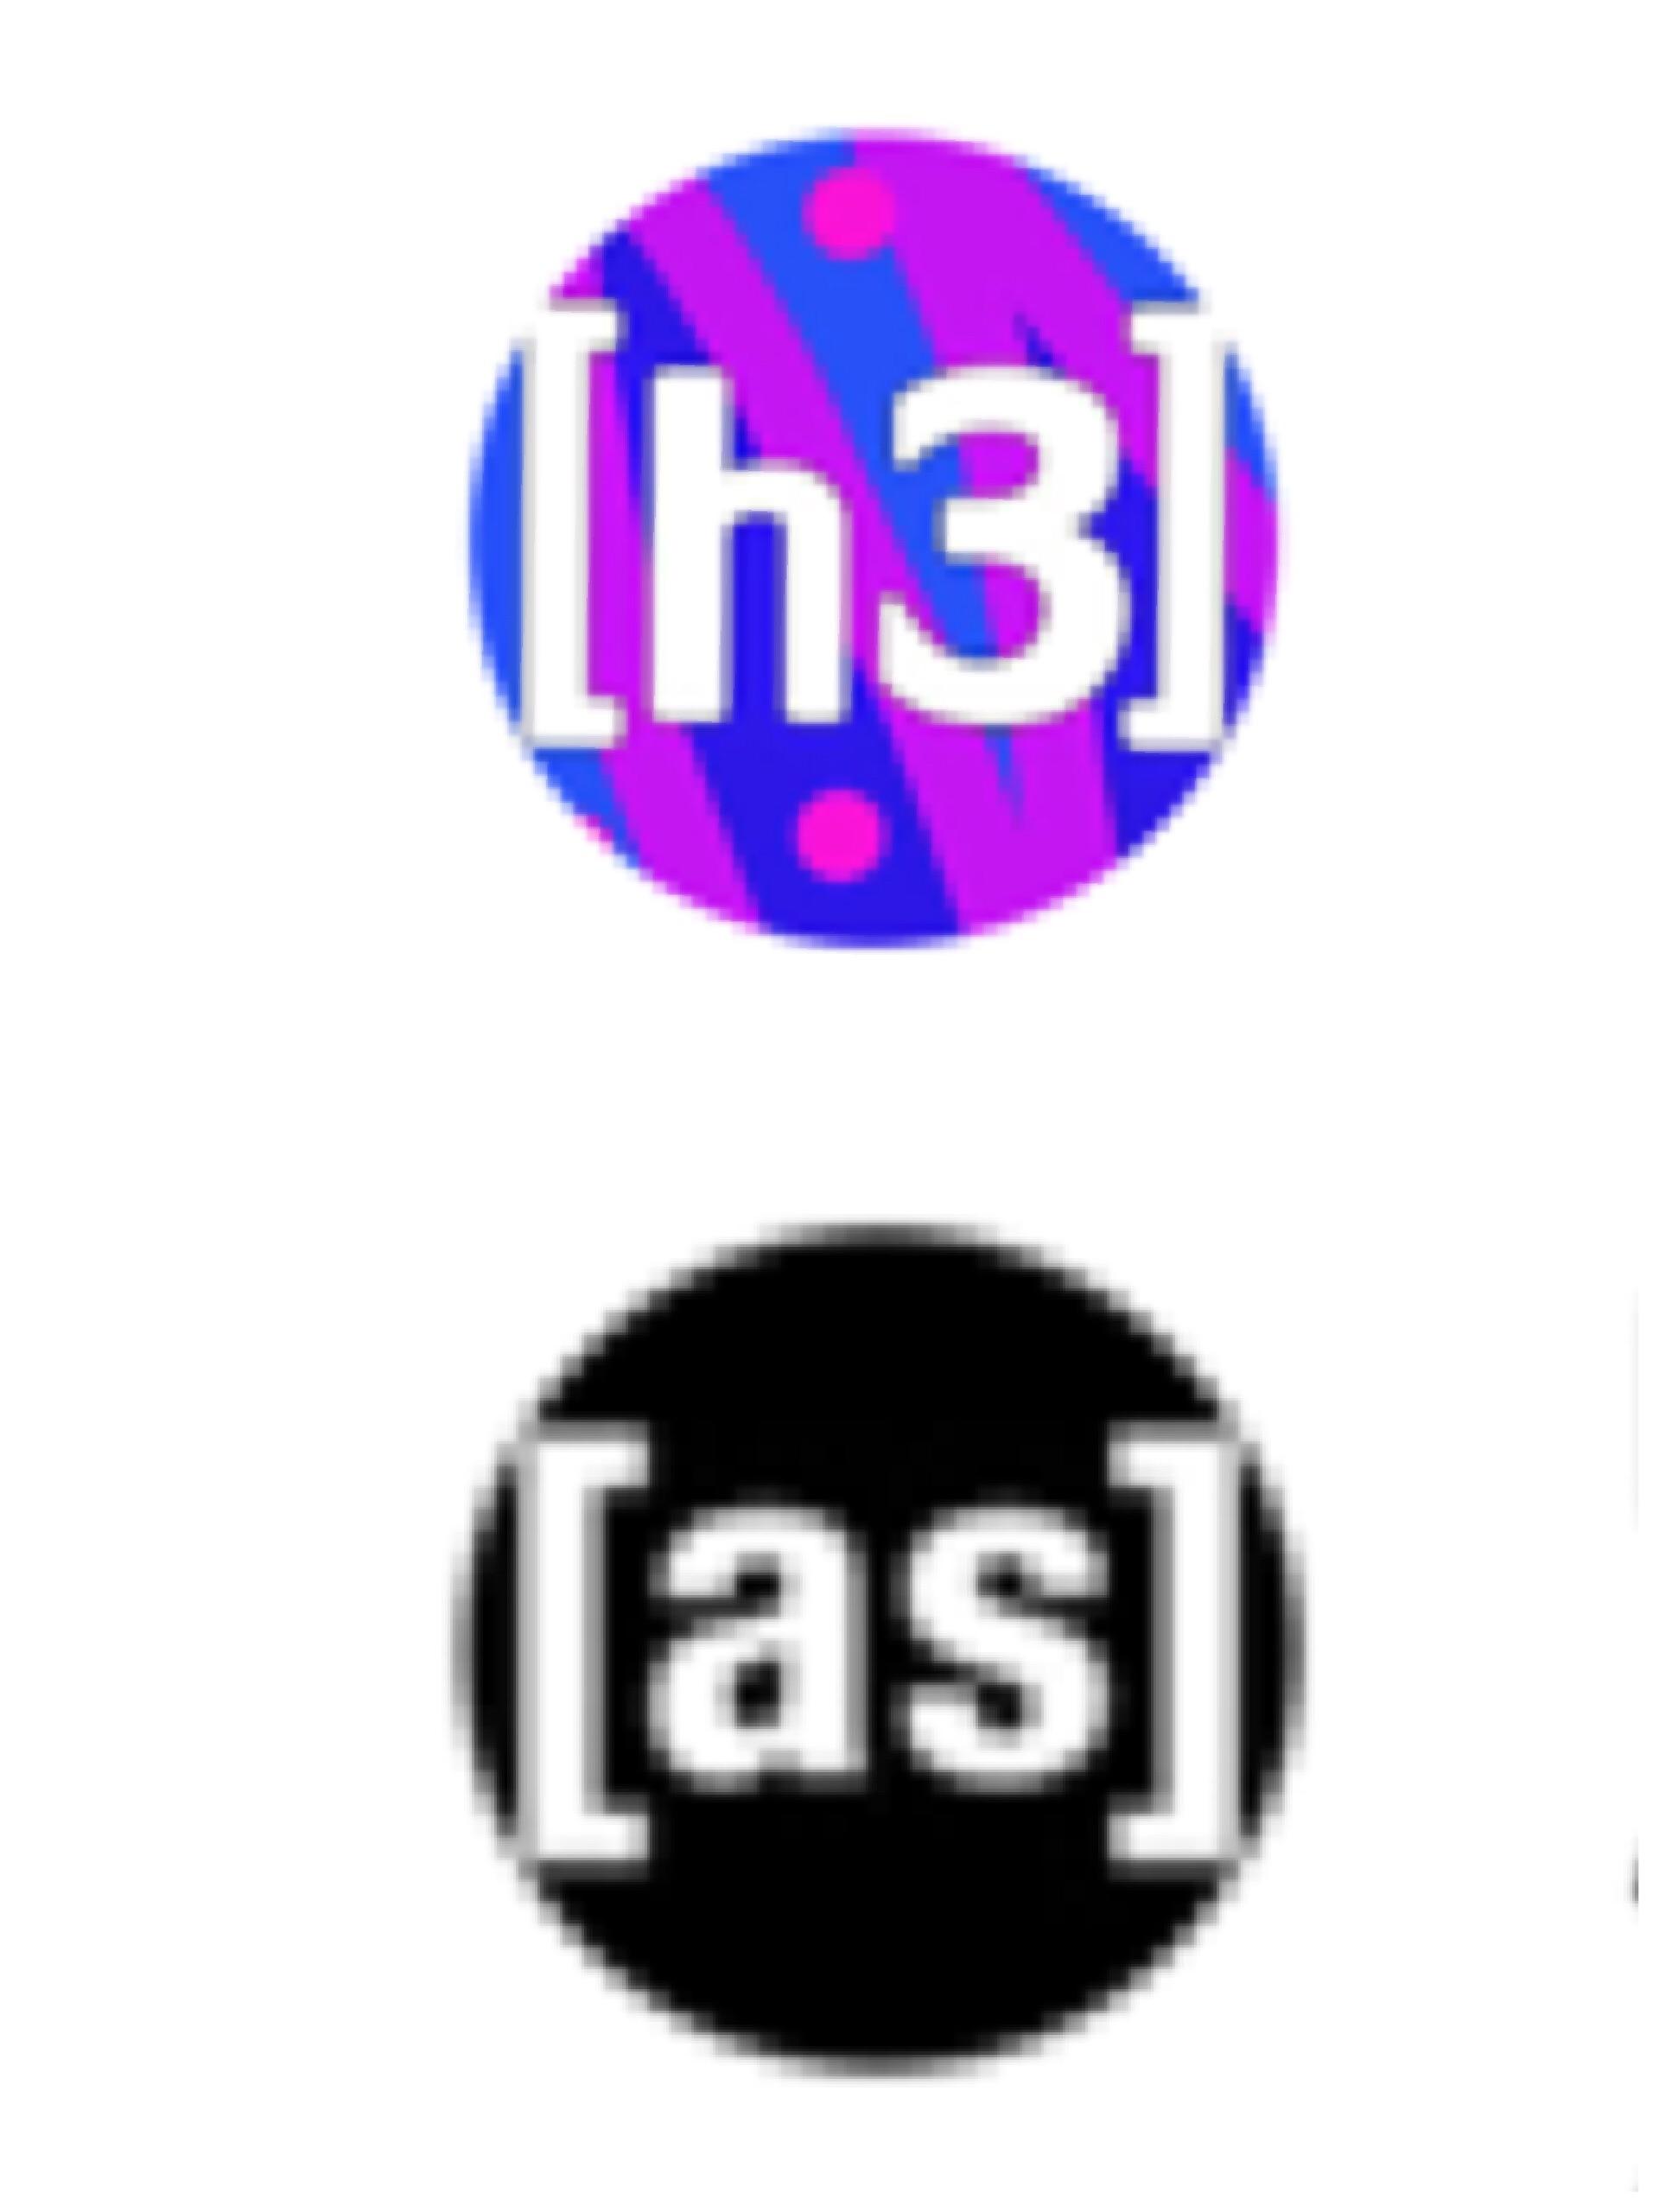 Anyone noticed h3h3 and adultswim have similar logos.